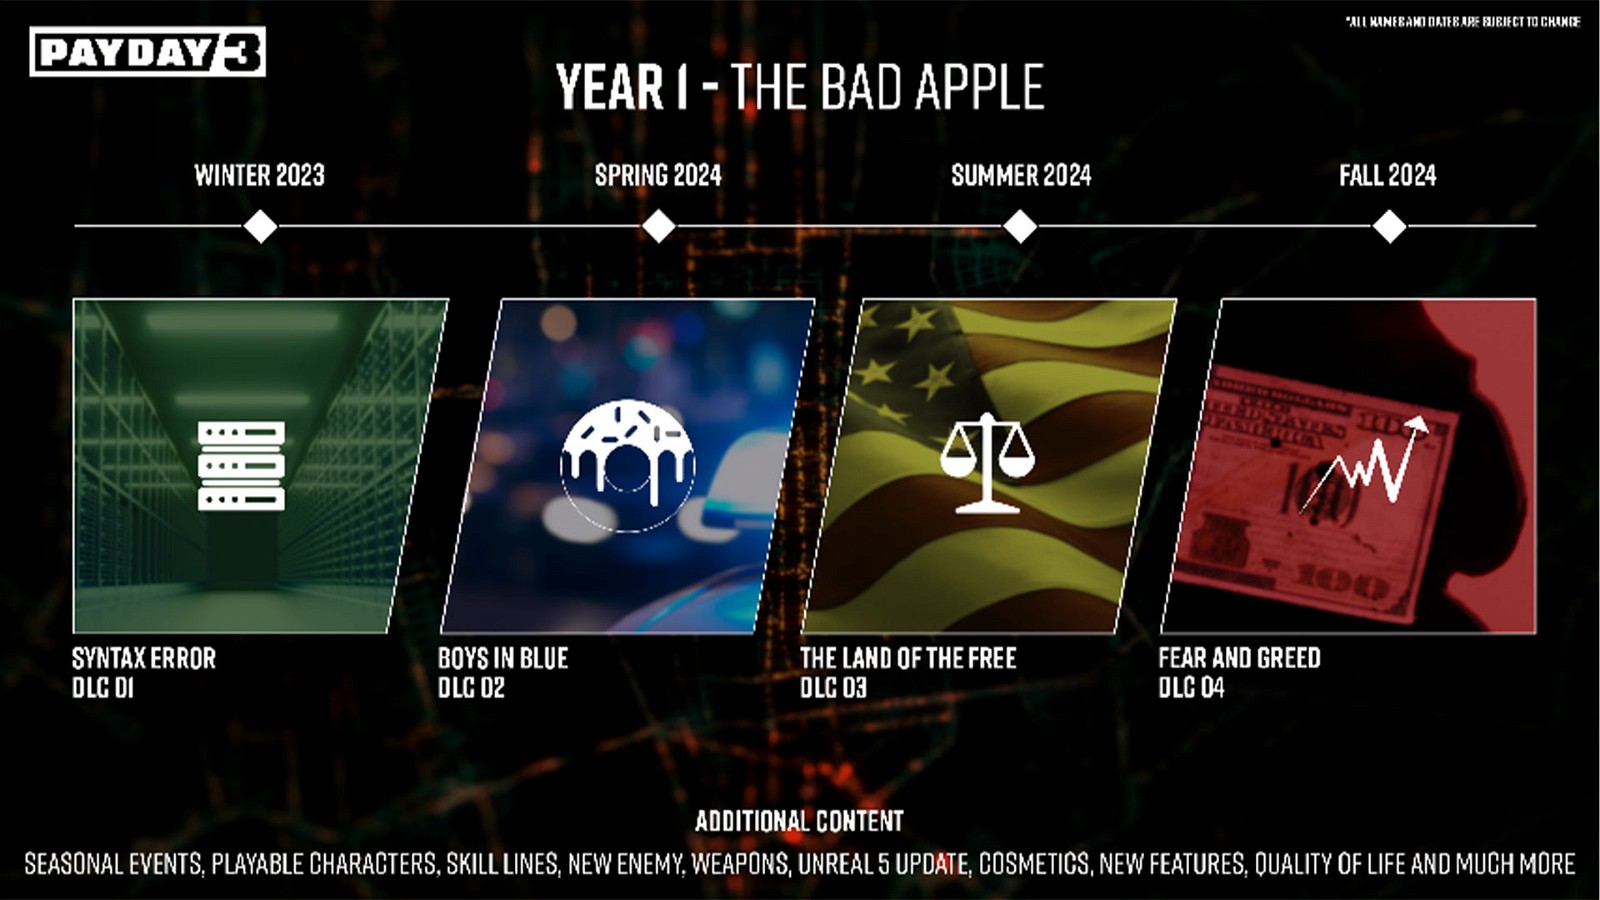 The first year after the launch of Payday 3 is called The Bad Apple.